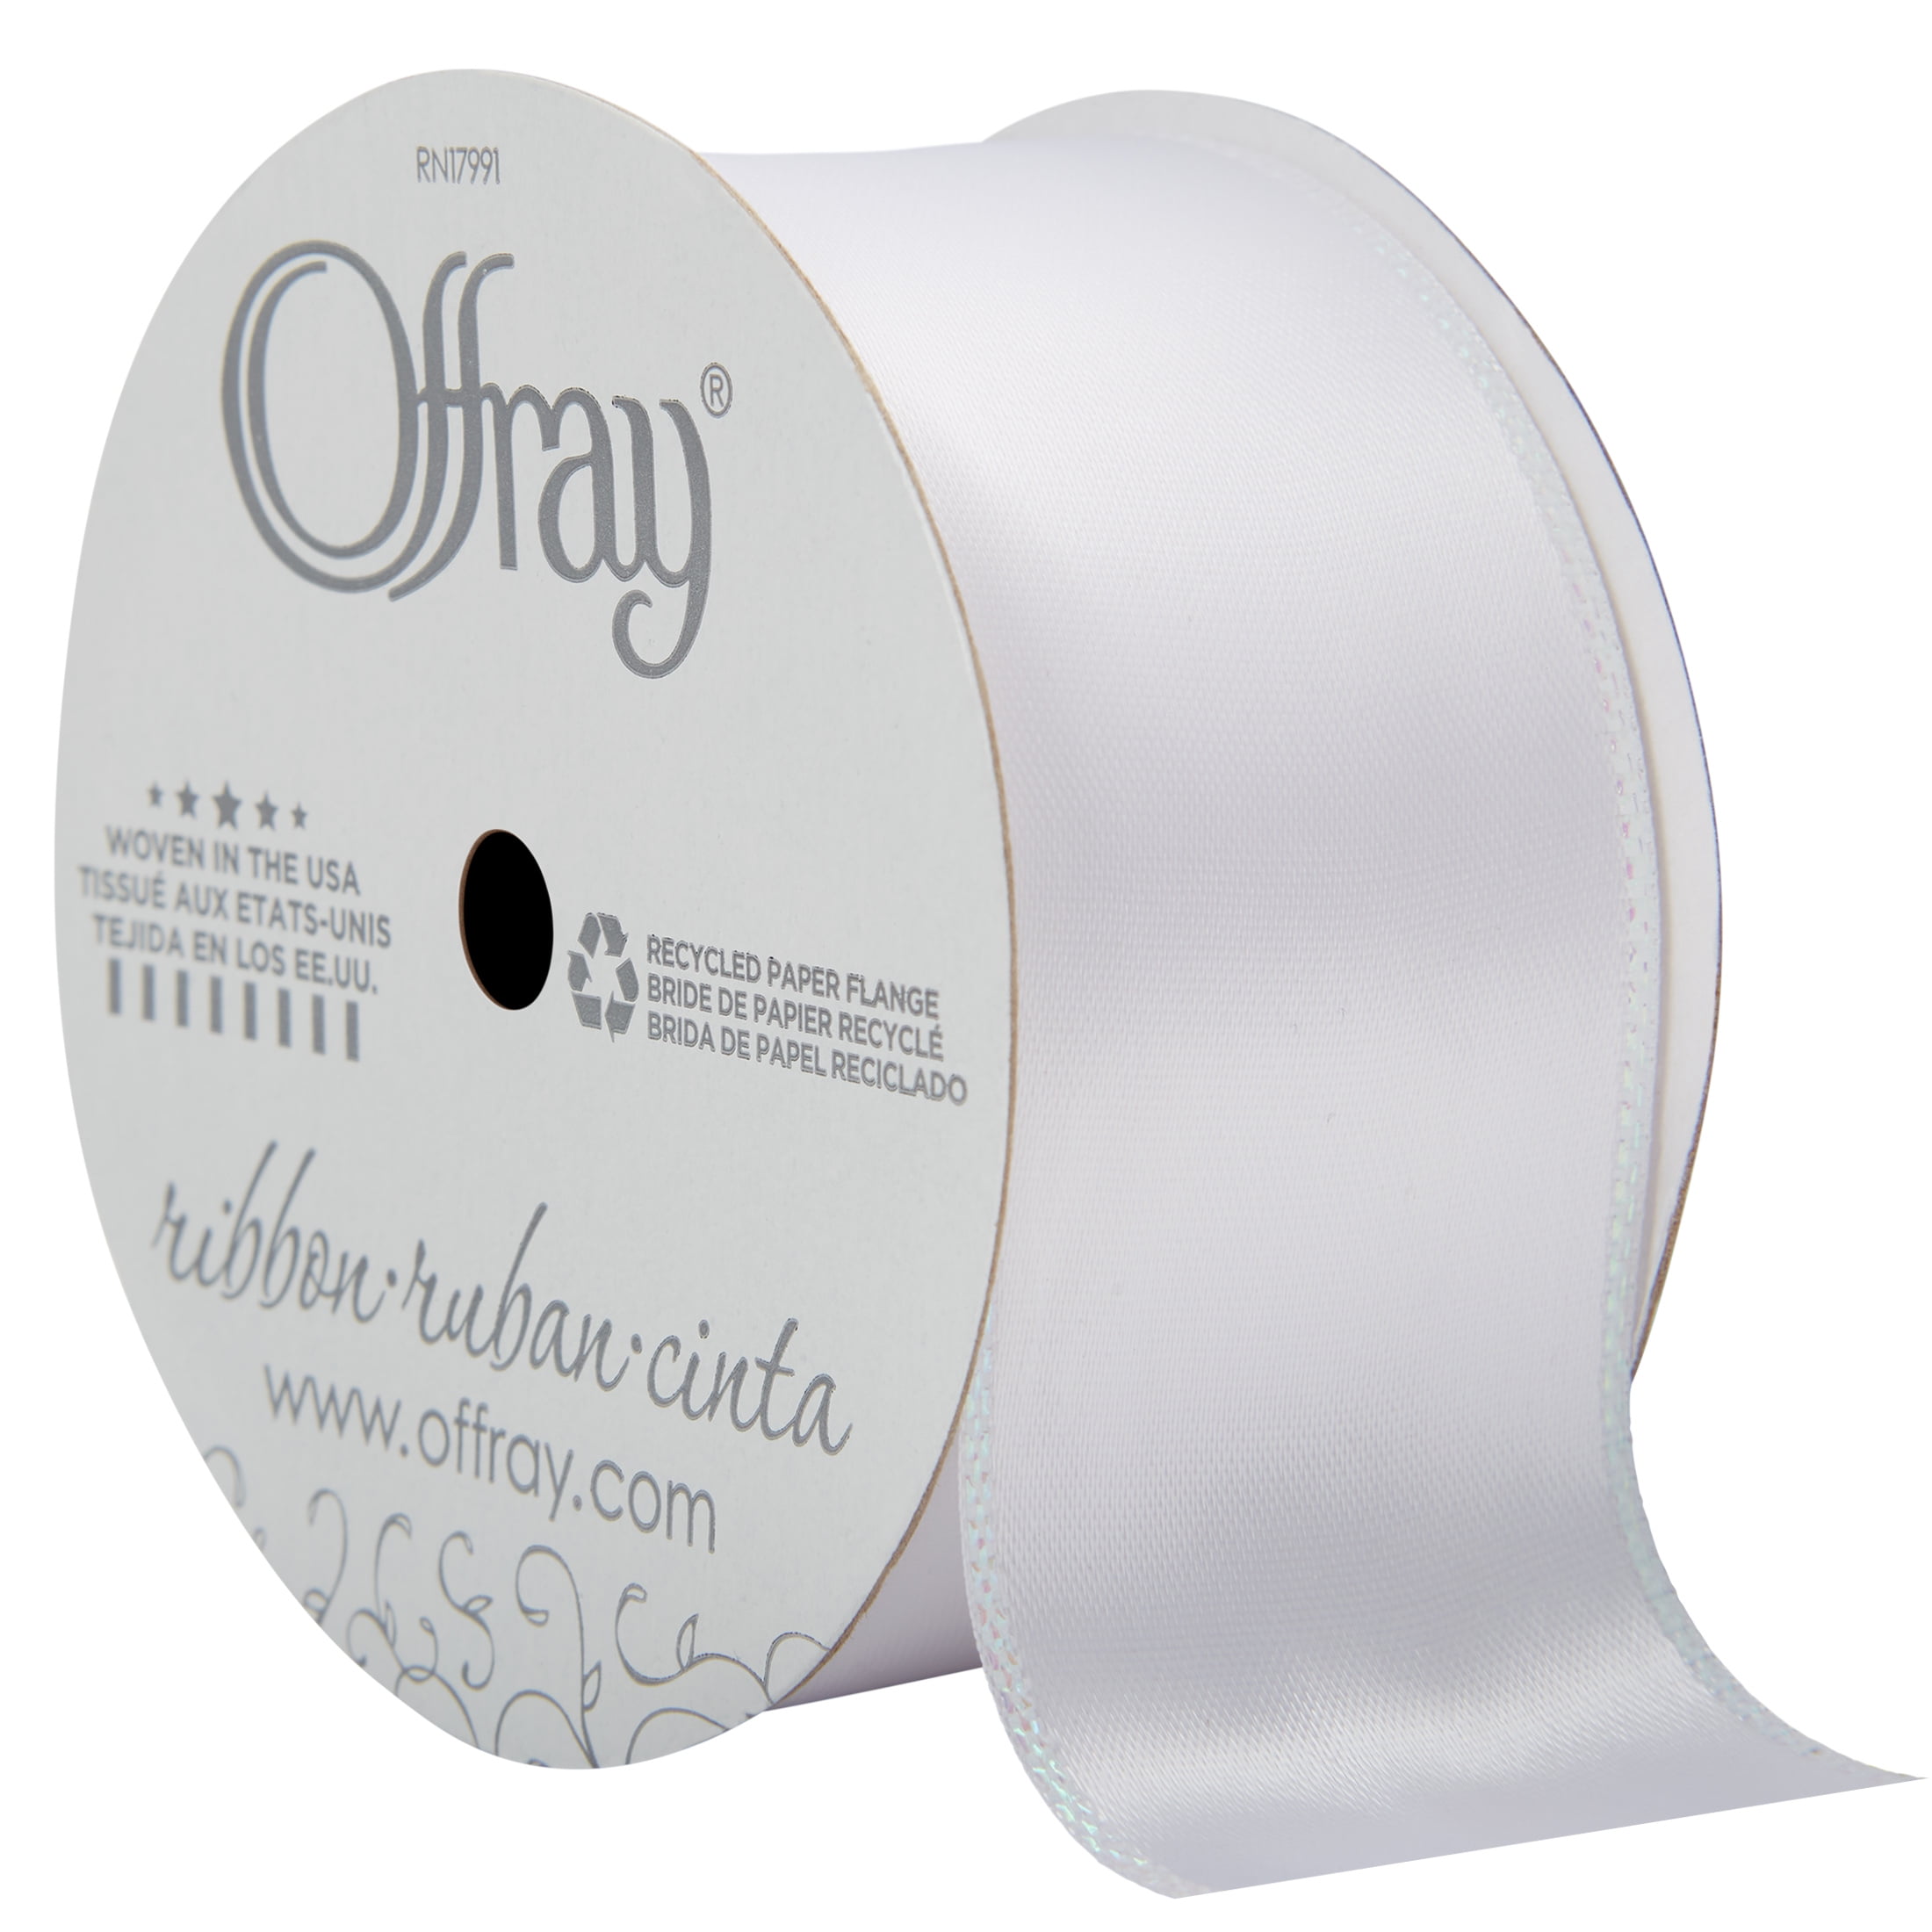 Offray Ribbon, Green 1 1/2 Inch Double Face Satin Ribbon for